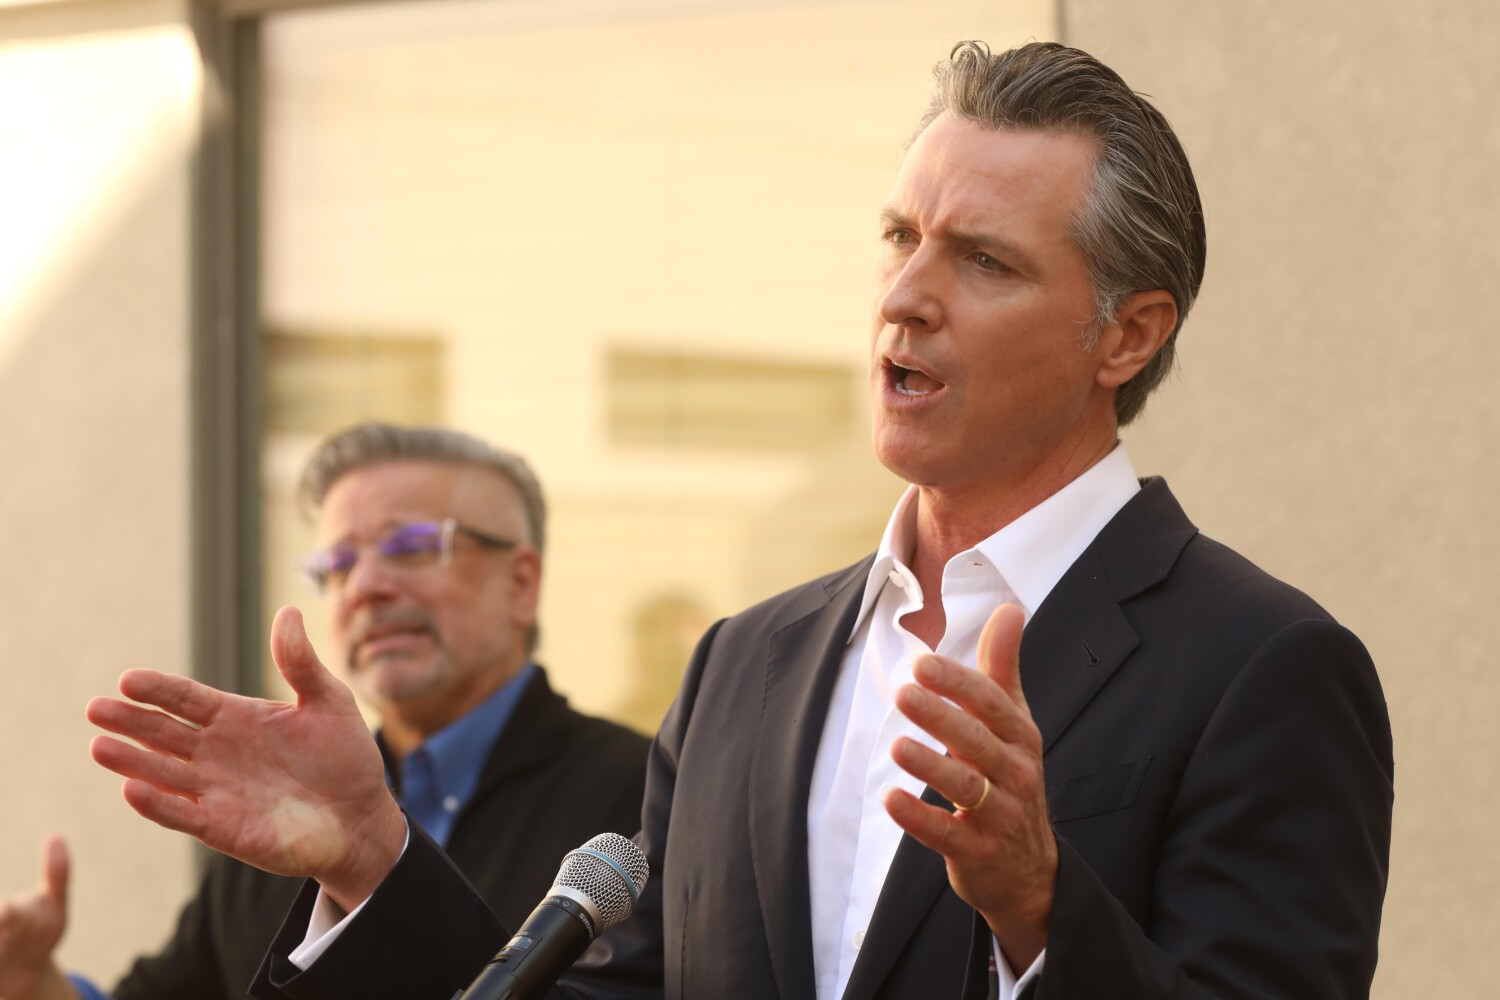 Column: Newsom stares down Texas on abortion and guns, winning political points in the process